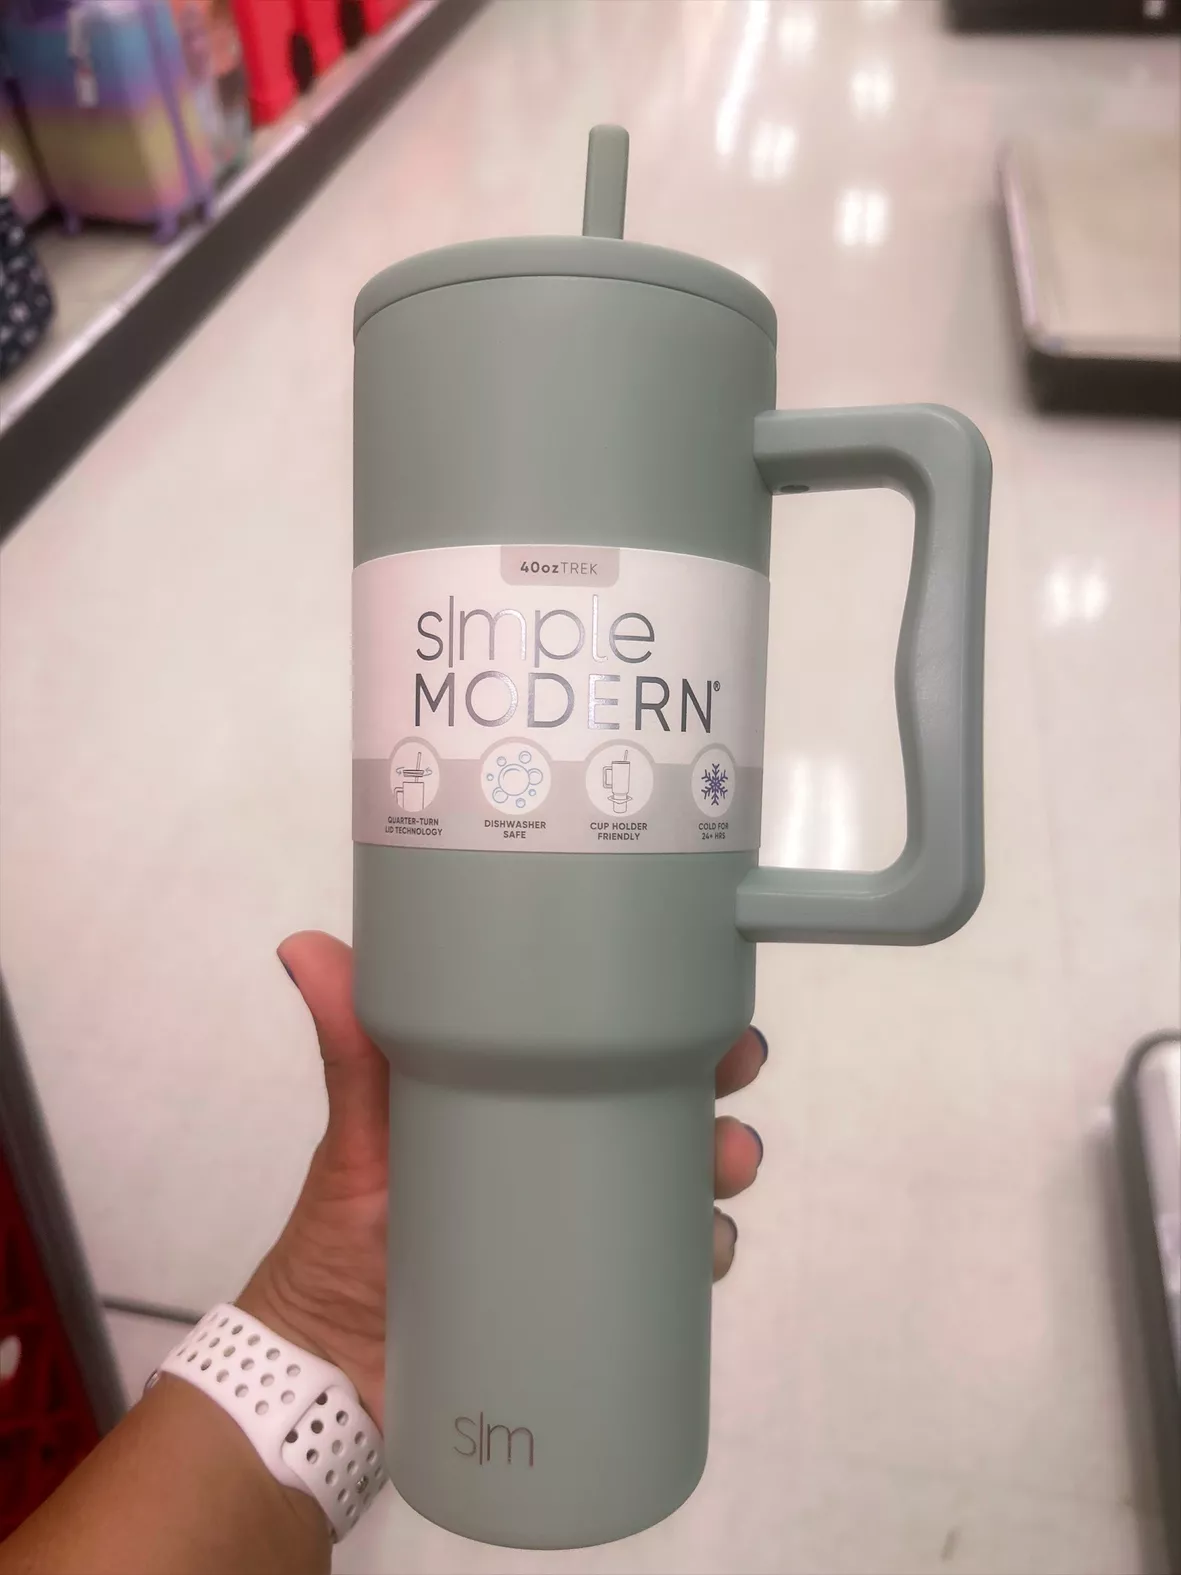 Because who doesn't need a 40 oz tumbler with a handle 🤣 #simplymoder